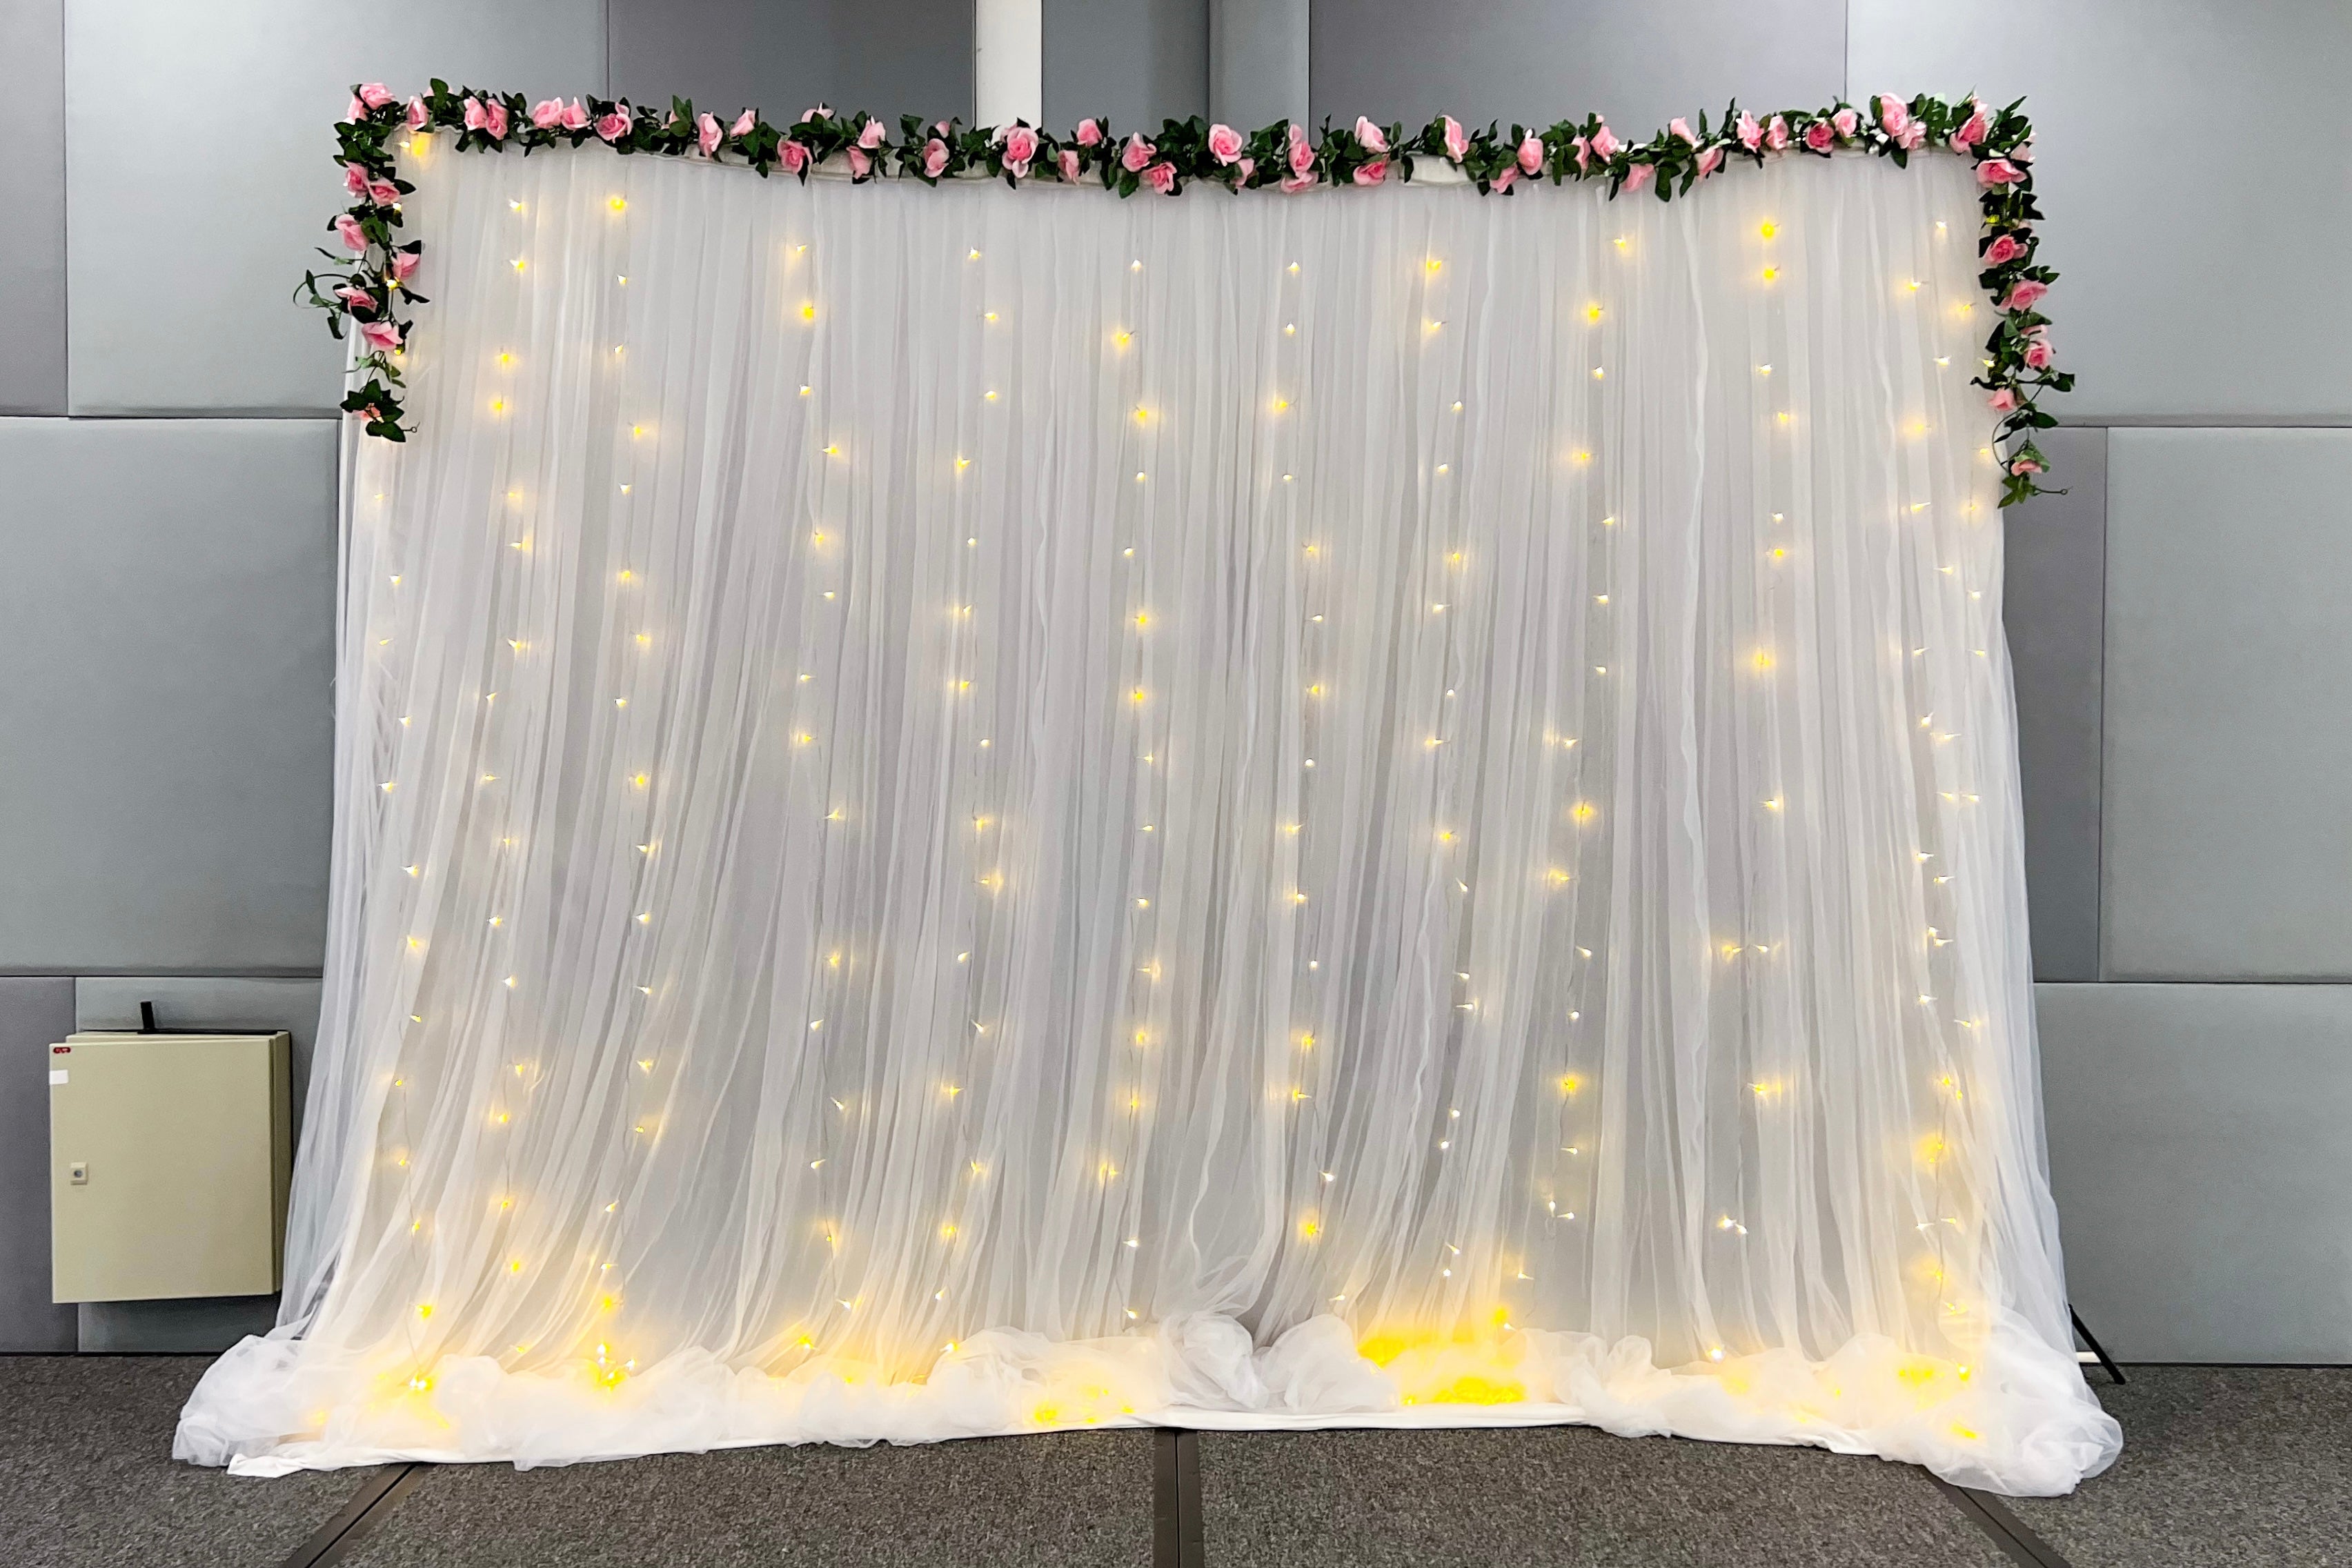 White Tulle Curtain Backdrop